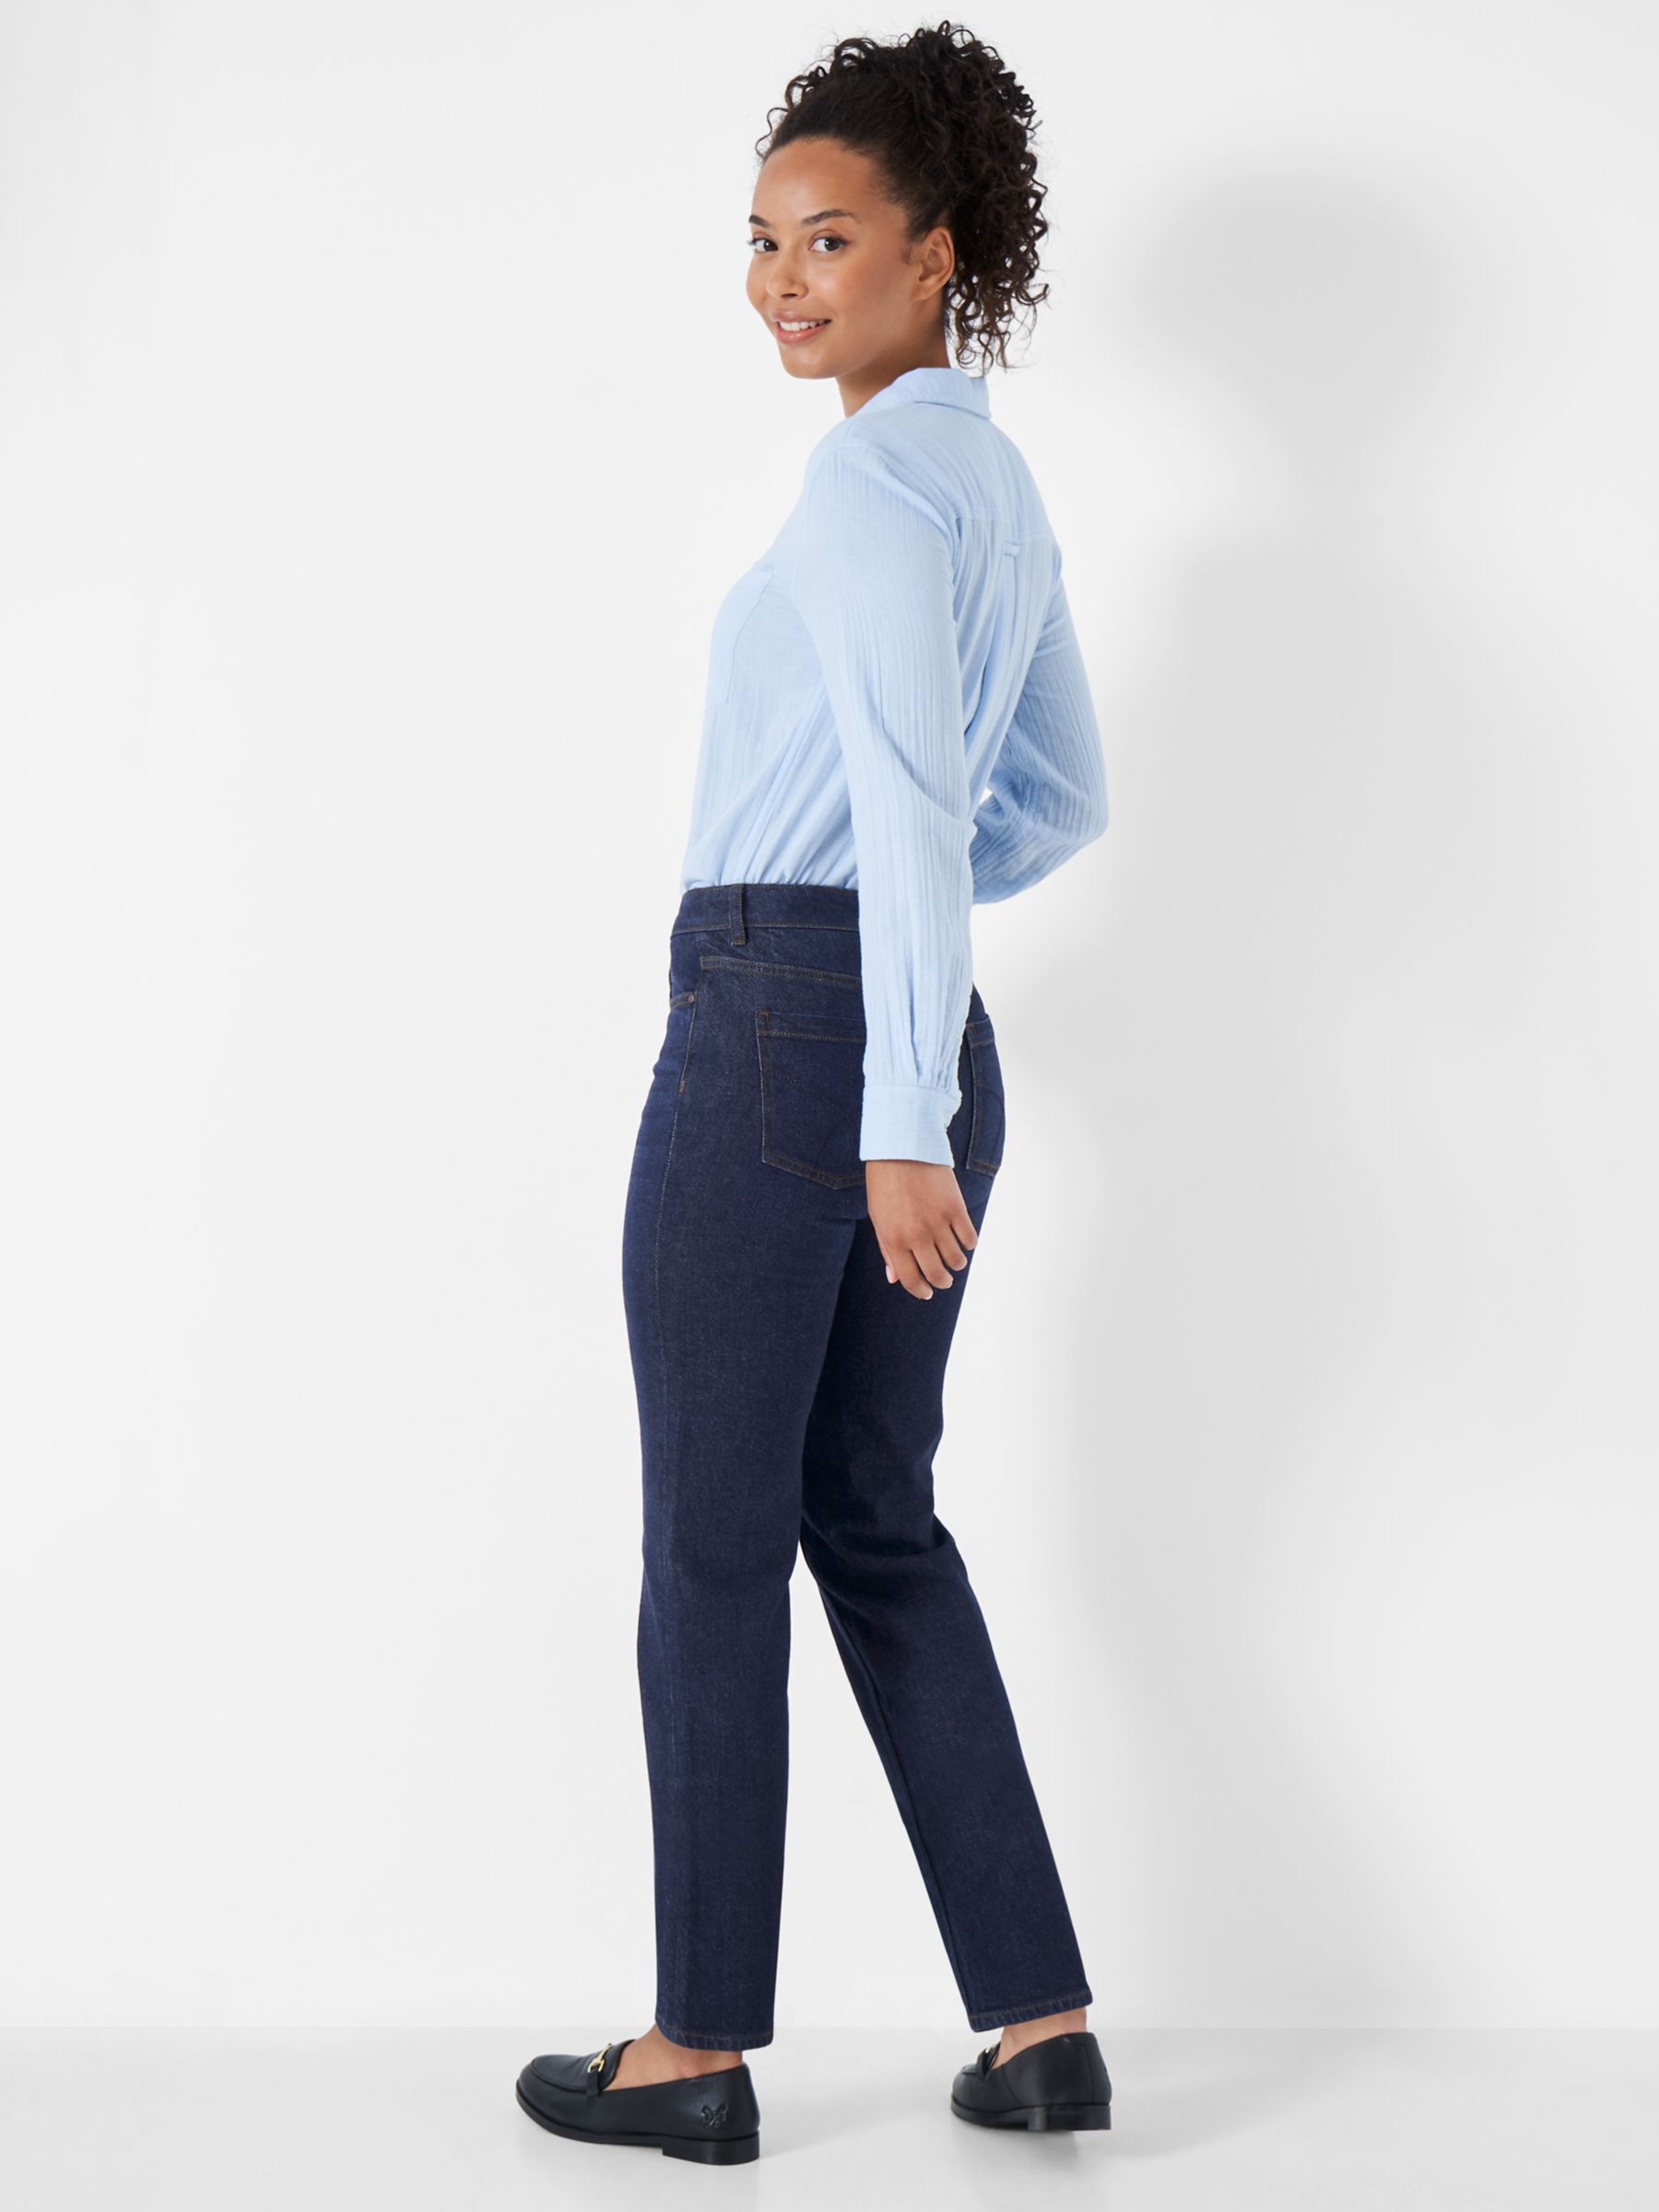 Buy Crew Clothing High Waisted Girlfriend Jeans Online at johnlewis.com